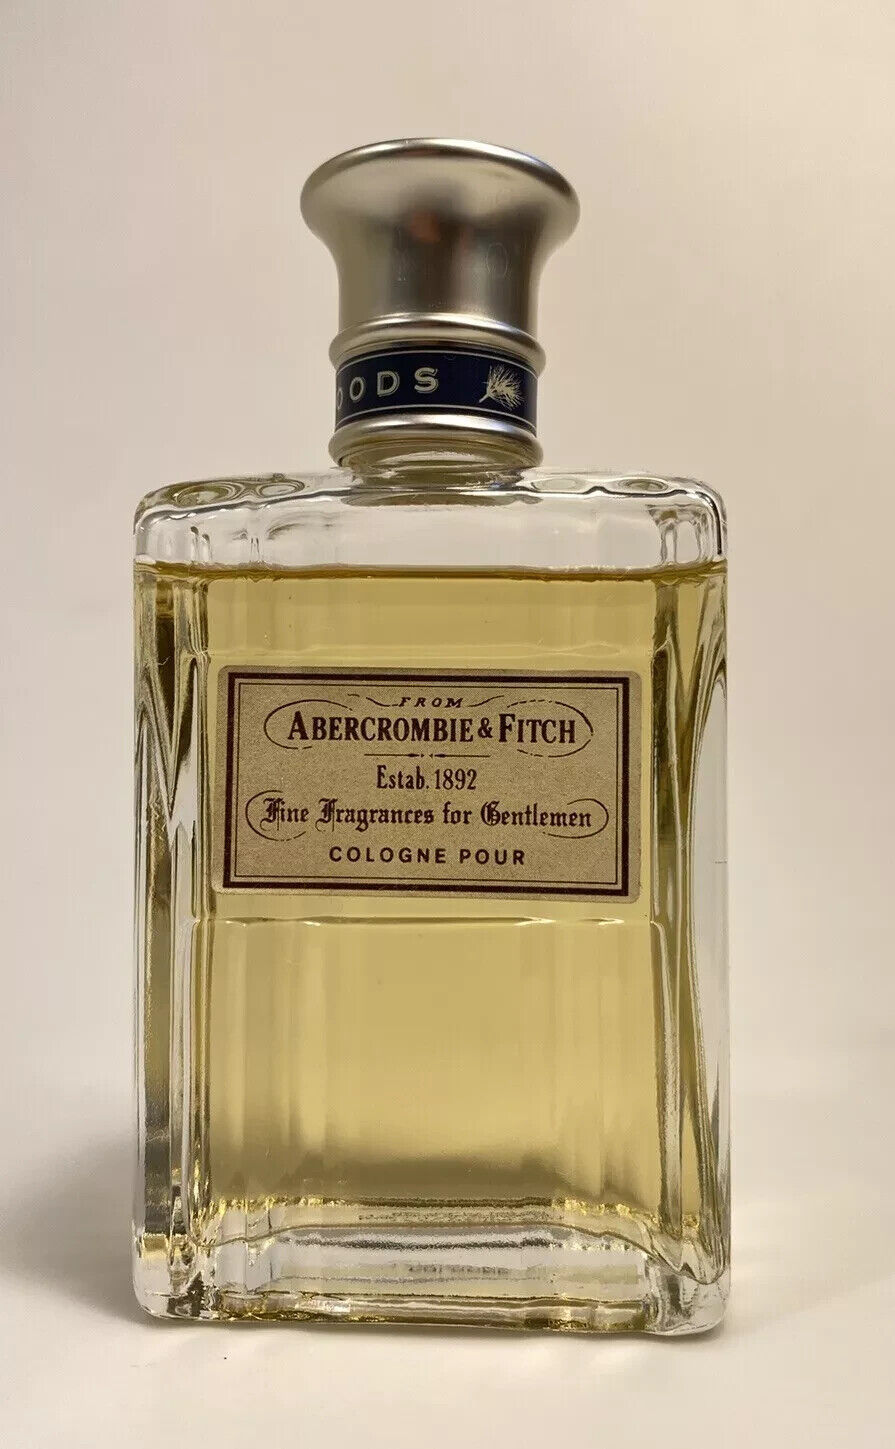 RARE VINTAGE 1990\'s WOODS Cologne Pour by Abercrombie & Fitch 10ml Sprayer